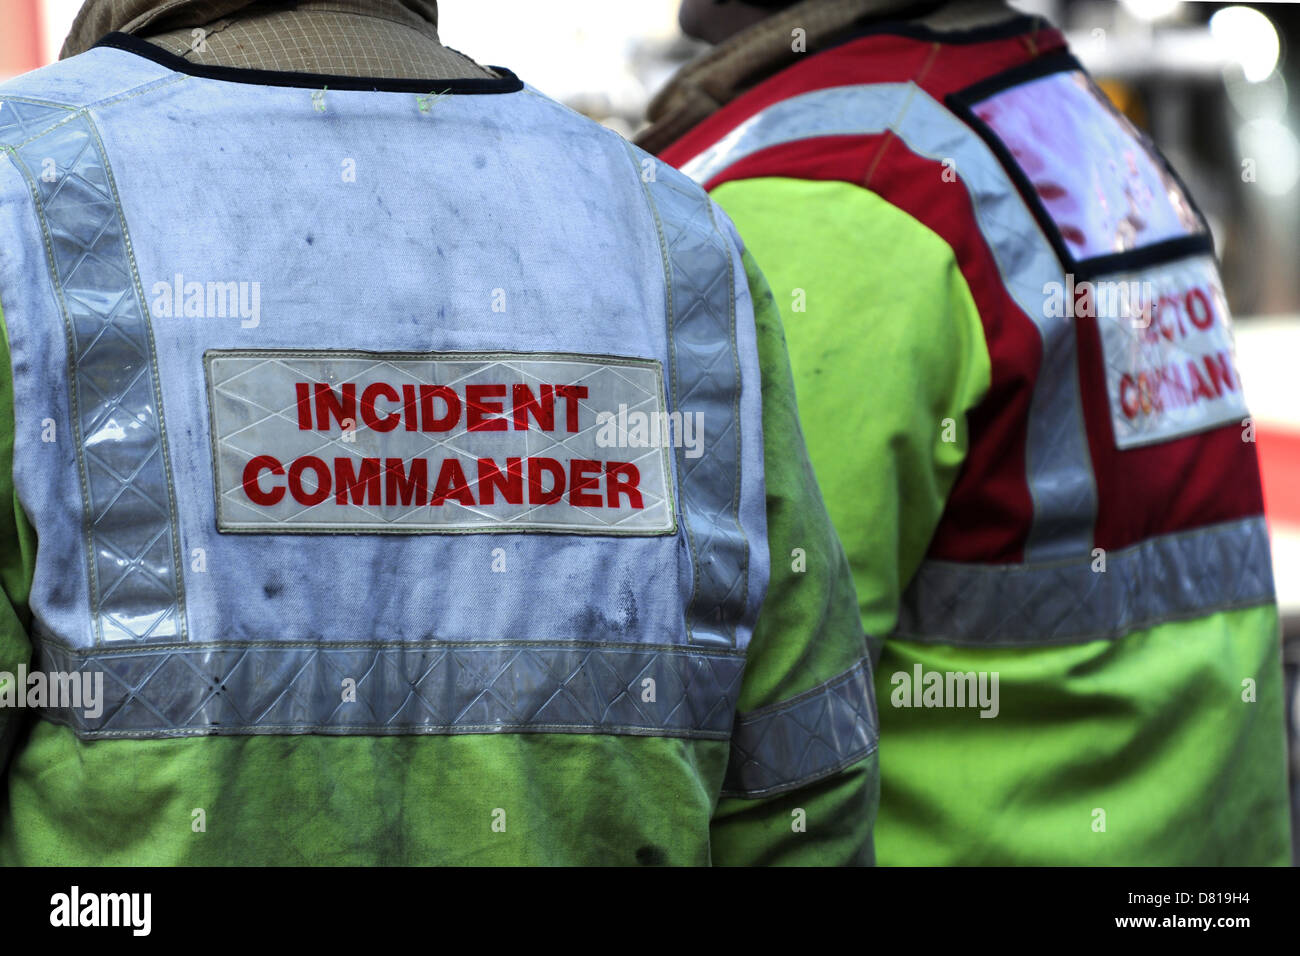 Incident commander in the fire service. Stock Photo